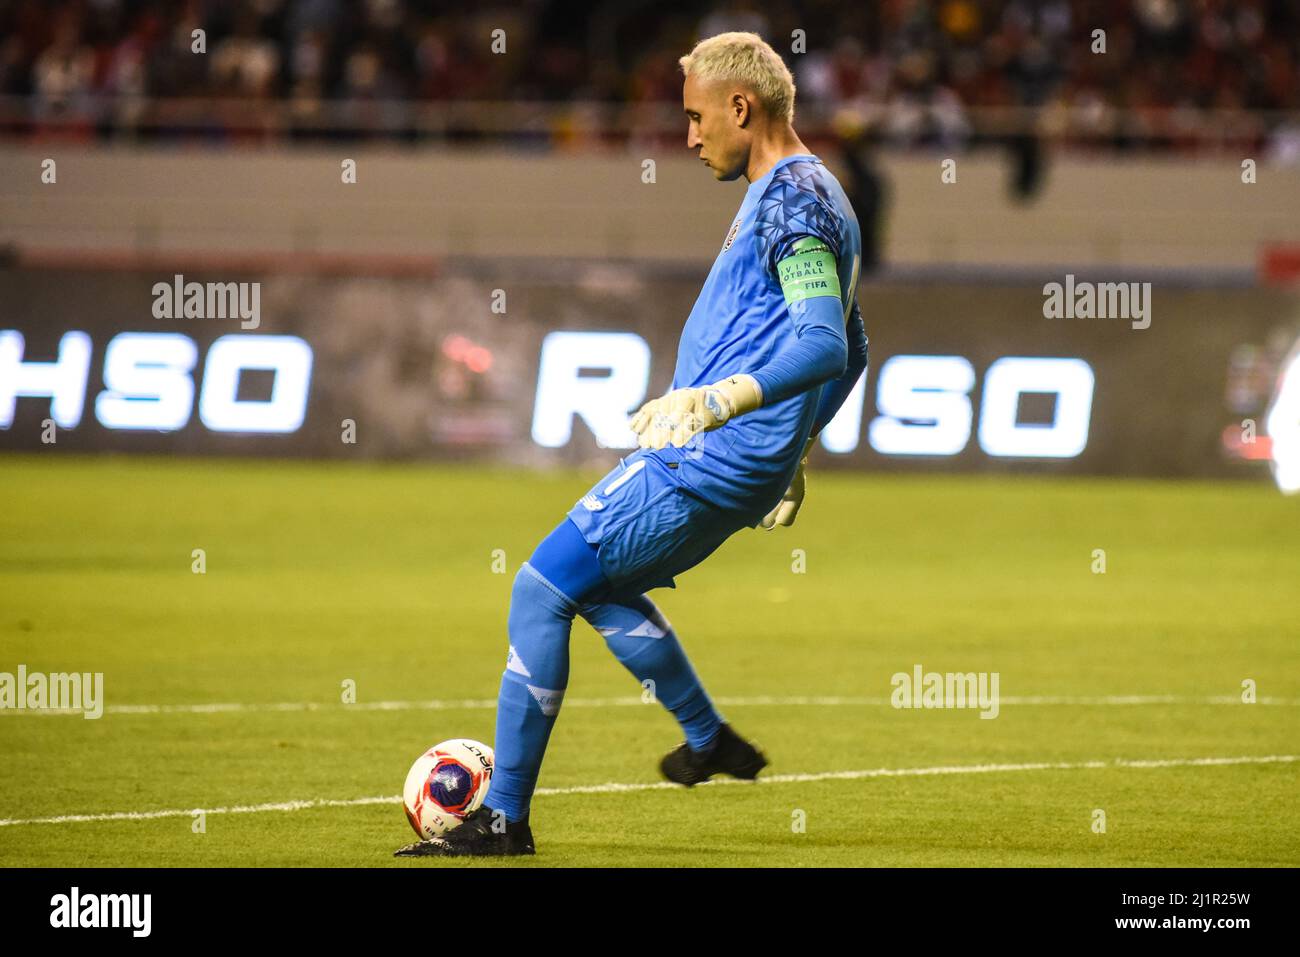 SAN JOSE, Costa Rica: Keylor Navas, costarican goalkeeper, during the 1-0 Costa Rica victory over Canada in the Concacaf FIFA World Cup Qualifiers on Stock Photo